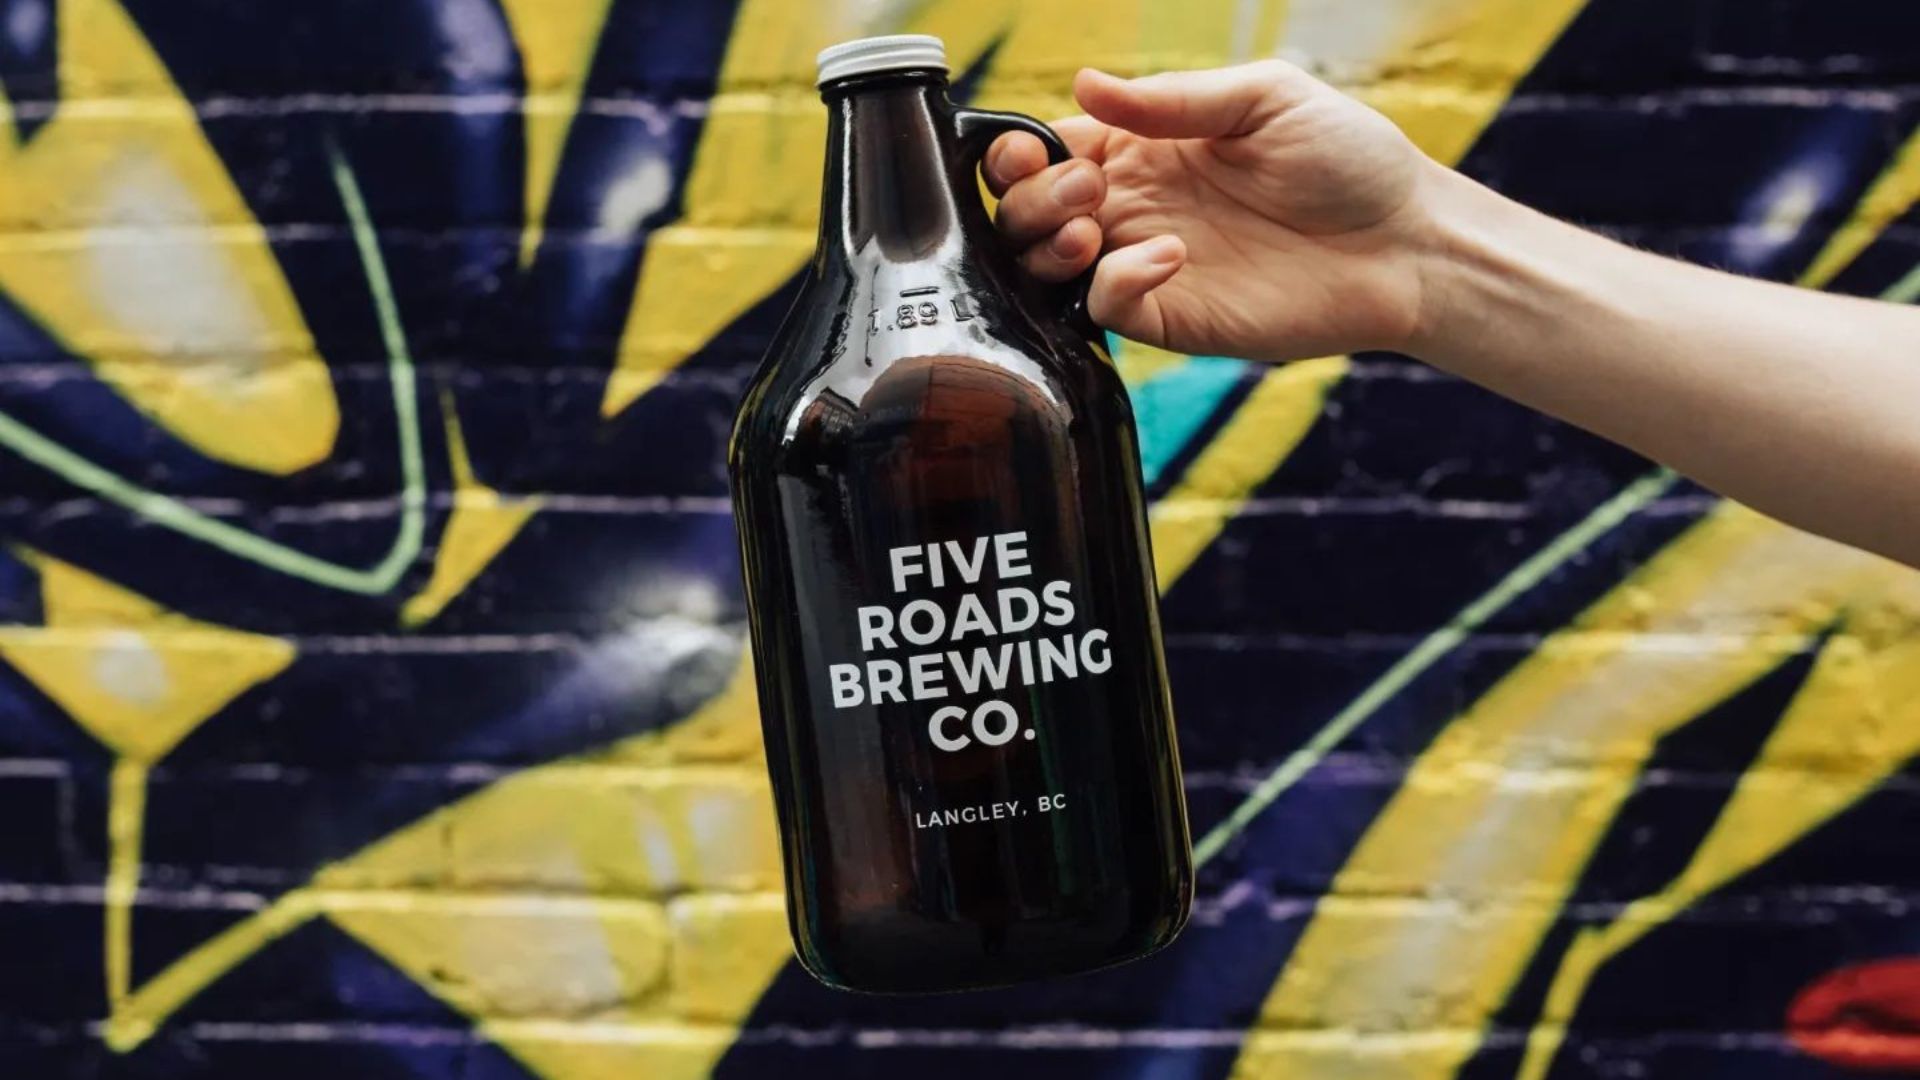 Five Roads Brewing Co. Bottle With Colorful Graffiti Background